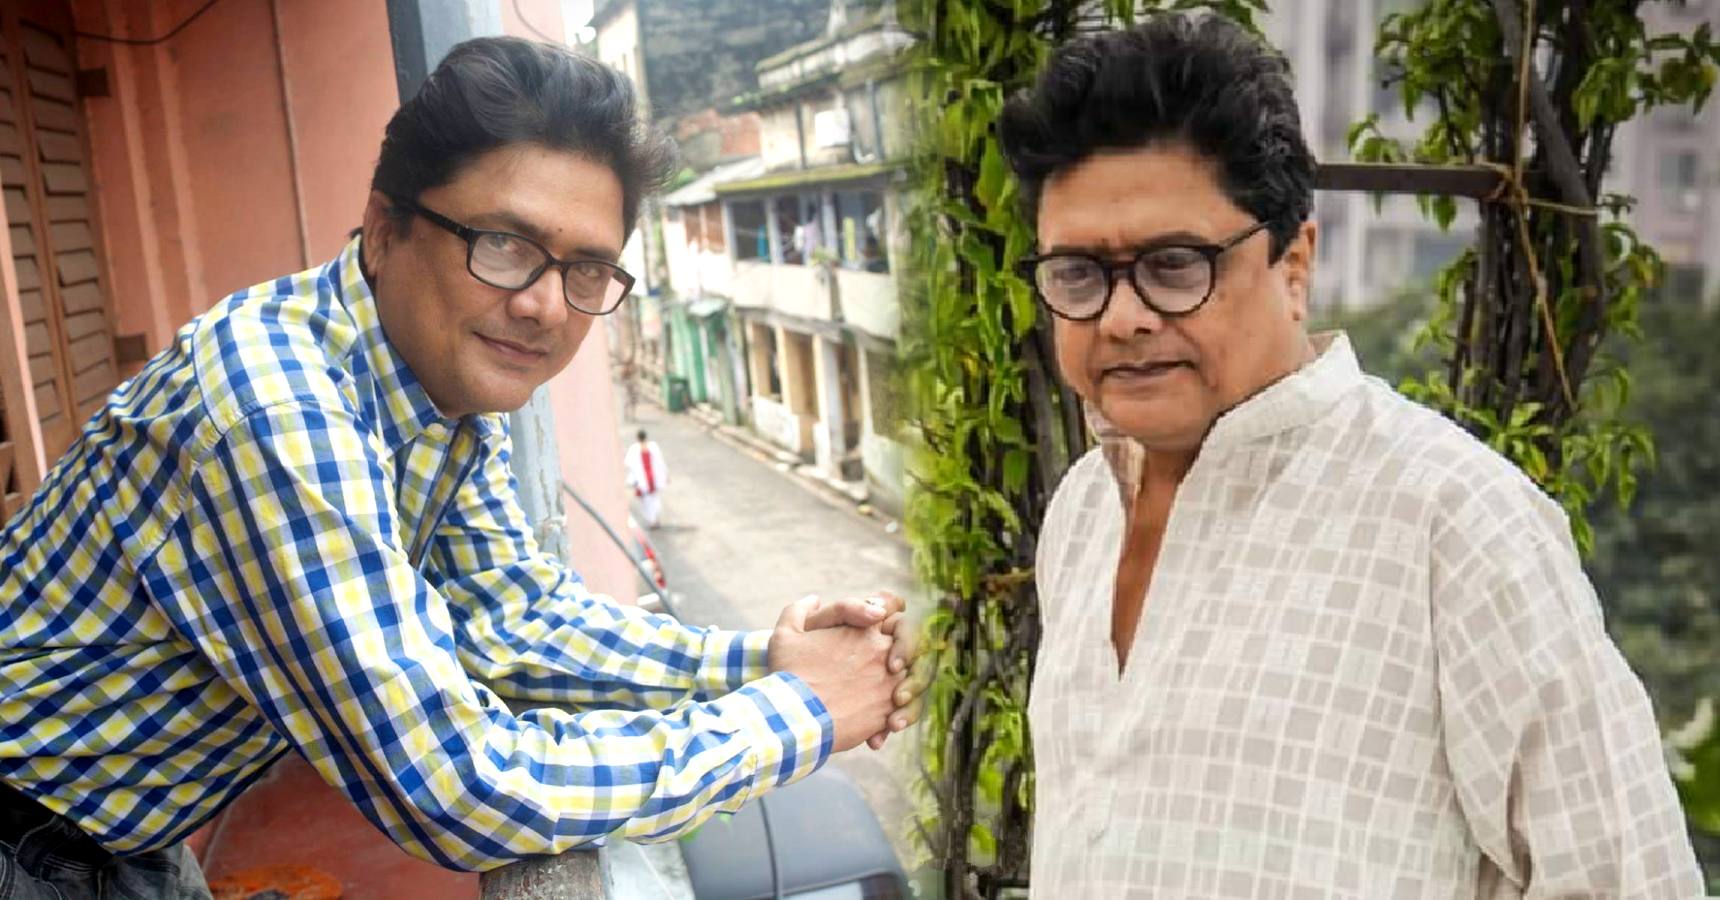 Bhaskar Banerjee opens up about his carrier in Exclusive Interview